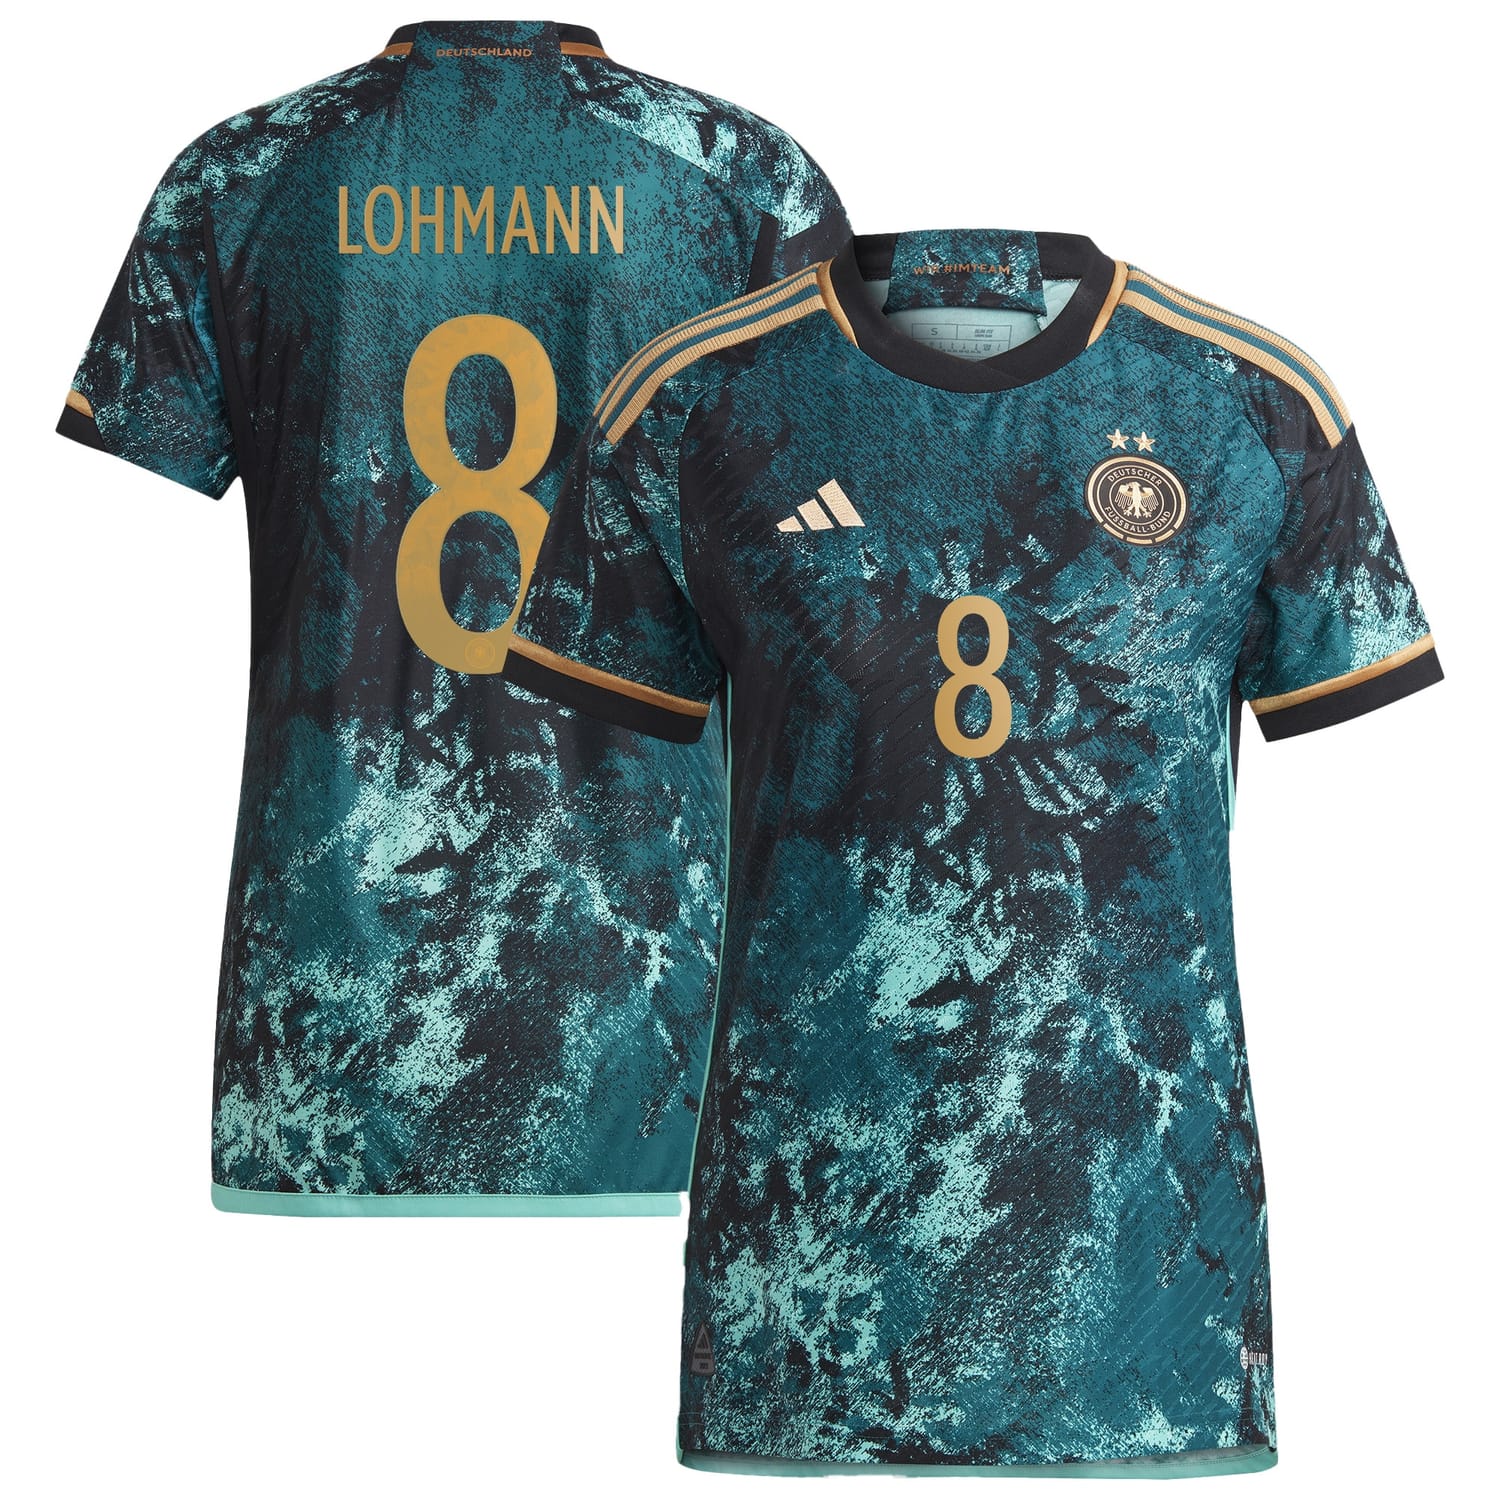 Germany National Team Away Authentic Jersey Shirt 2023 player Sydney Lohmann 8 printing for Women